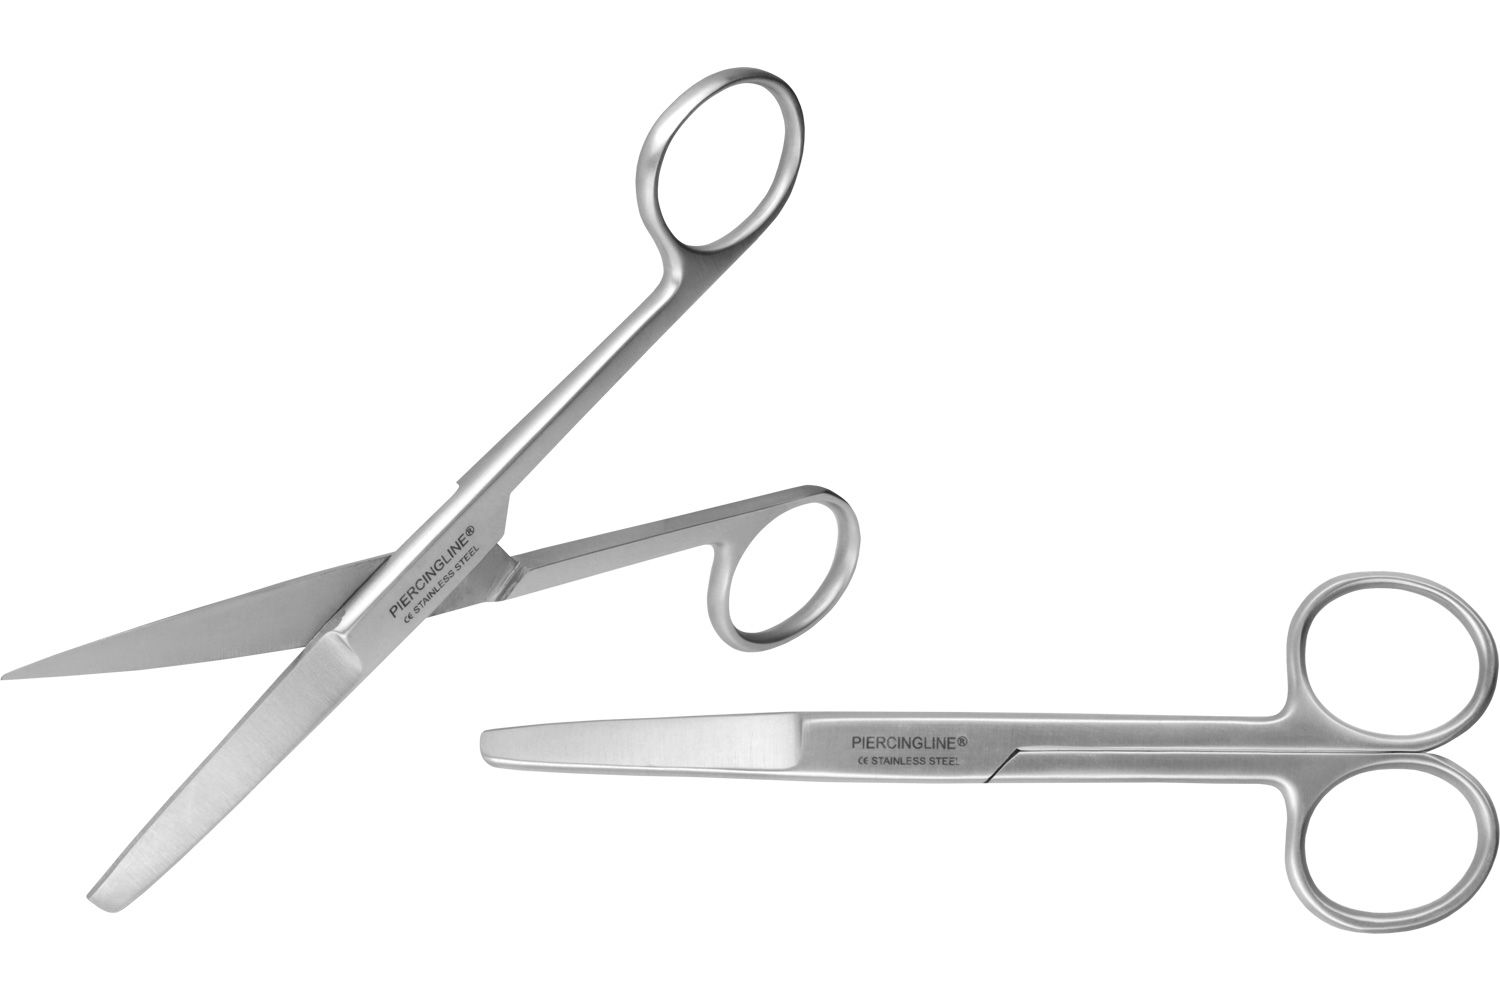 Stainless steel scissors with one flattened side